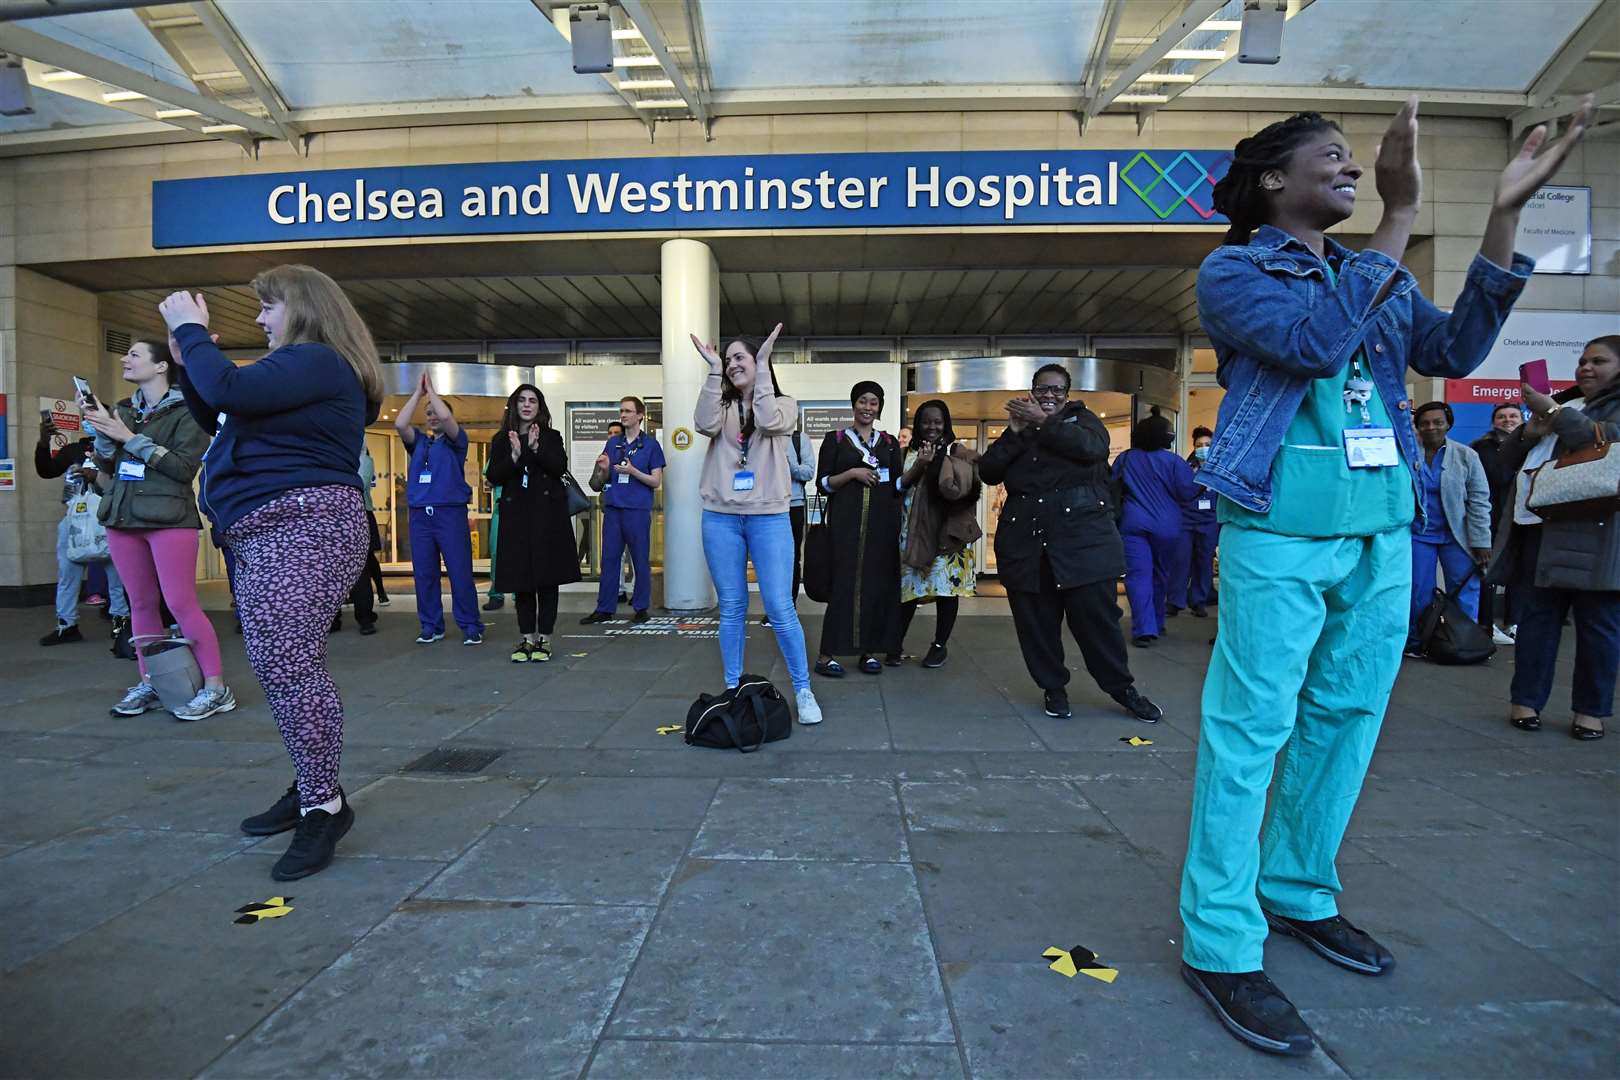 Medics outside the Chelsea and Westminster Hospital in London join in the applause (Kirsty O’Connor/PA)